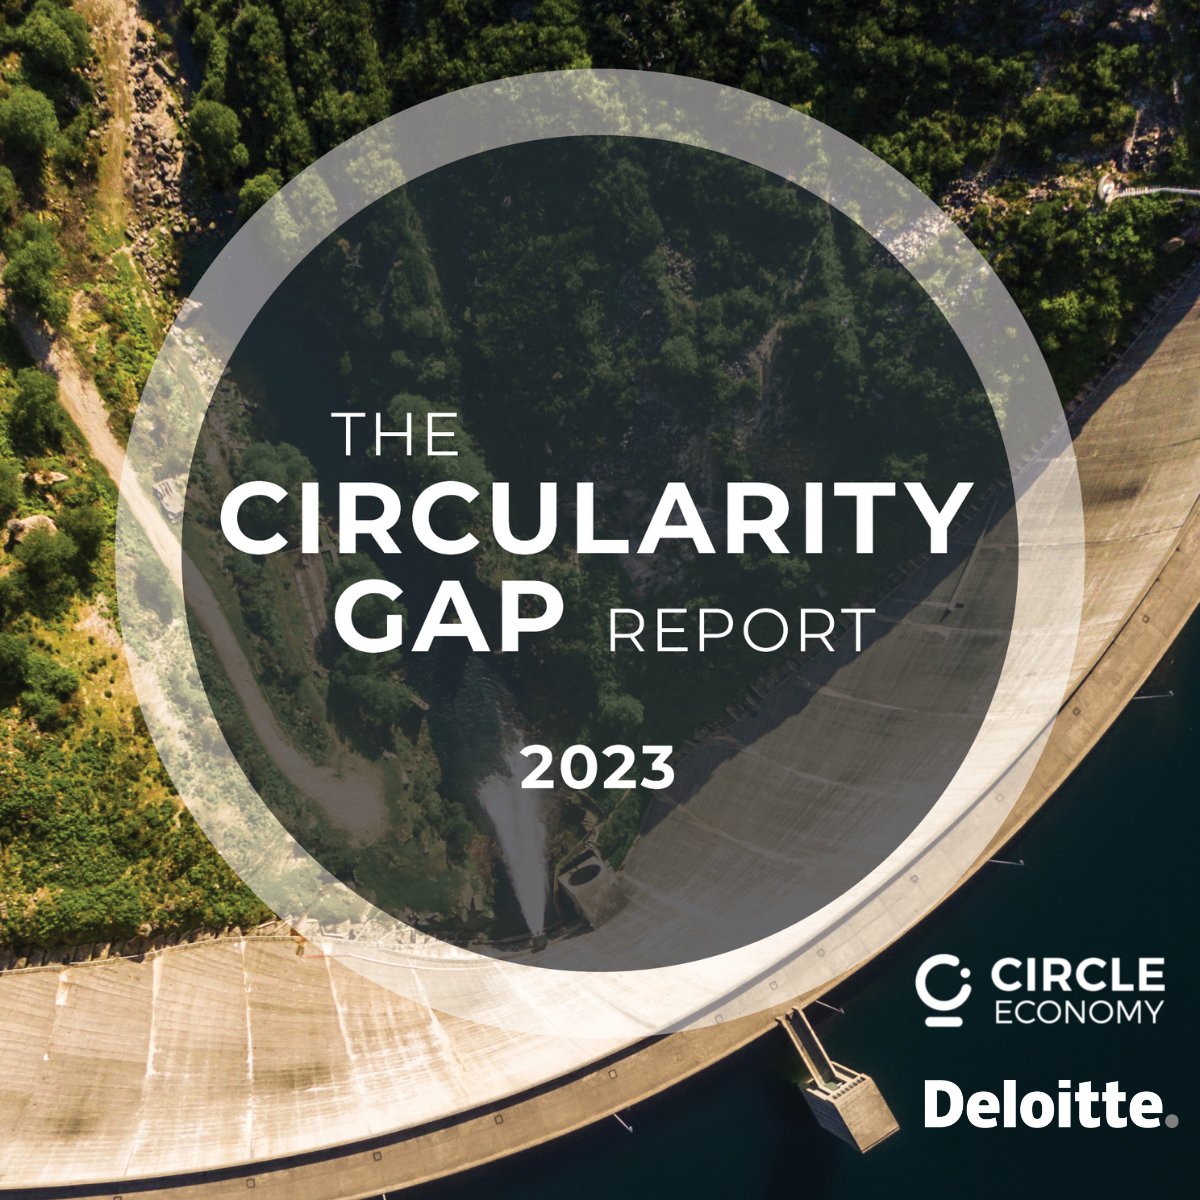 The Circularity Gap Report 2023 sounds the alarm: global circularity has shrunk to 7.2%. But the solutions allowing for a transition to a circular economy are within reach. 

Discover them in the full report: circularity-gap.world/2023

#CGR2023  @Deloitte